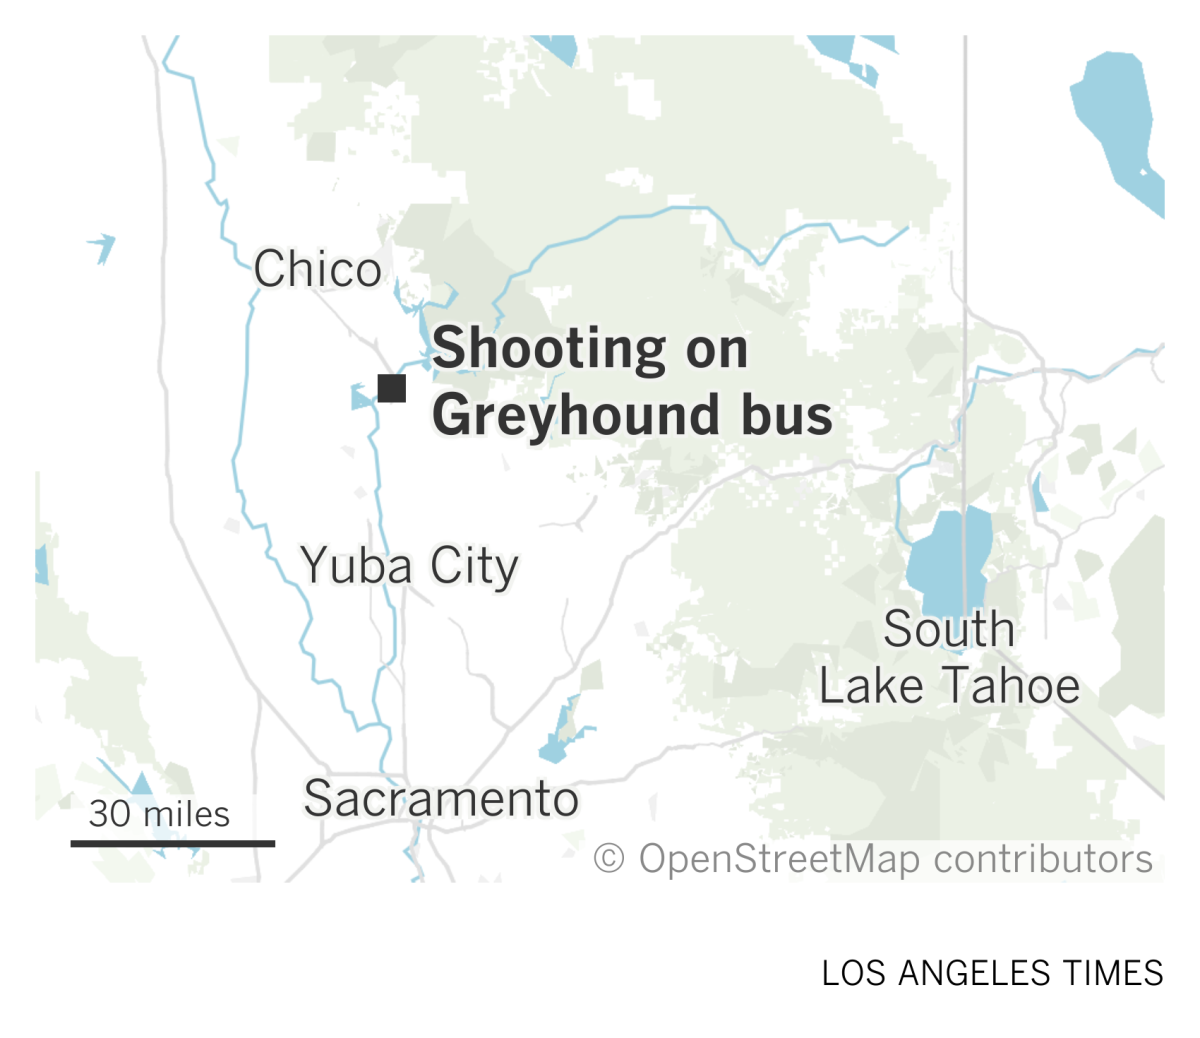 A map of Northern California showing the location of a shooting on a Greyhound bus in Oroville